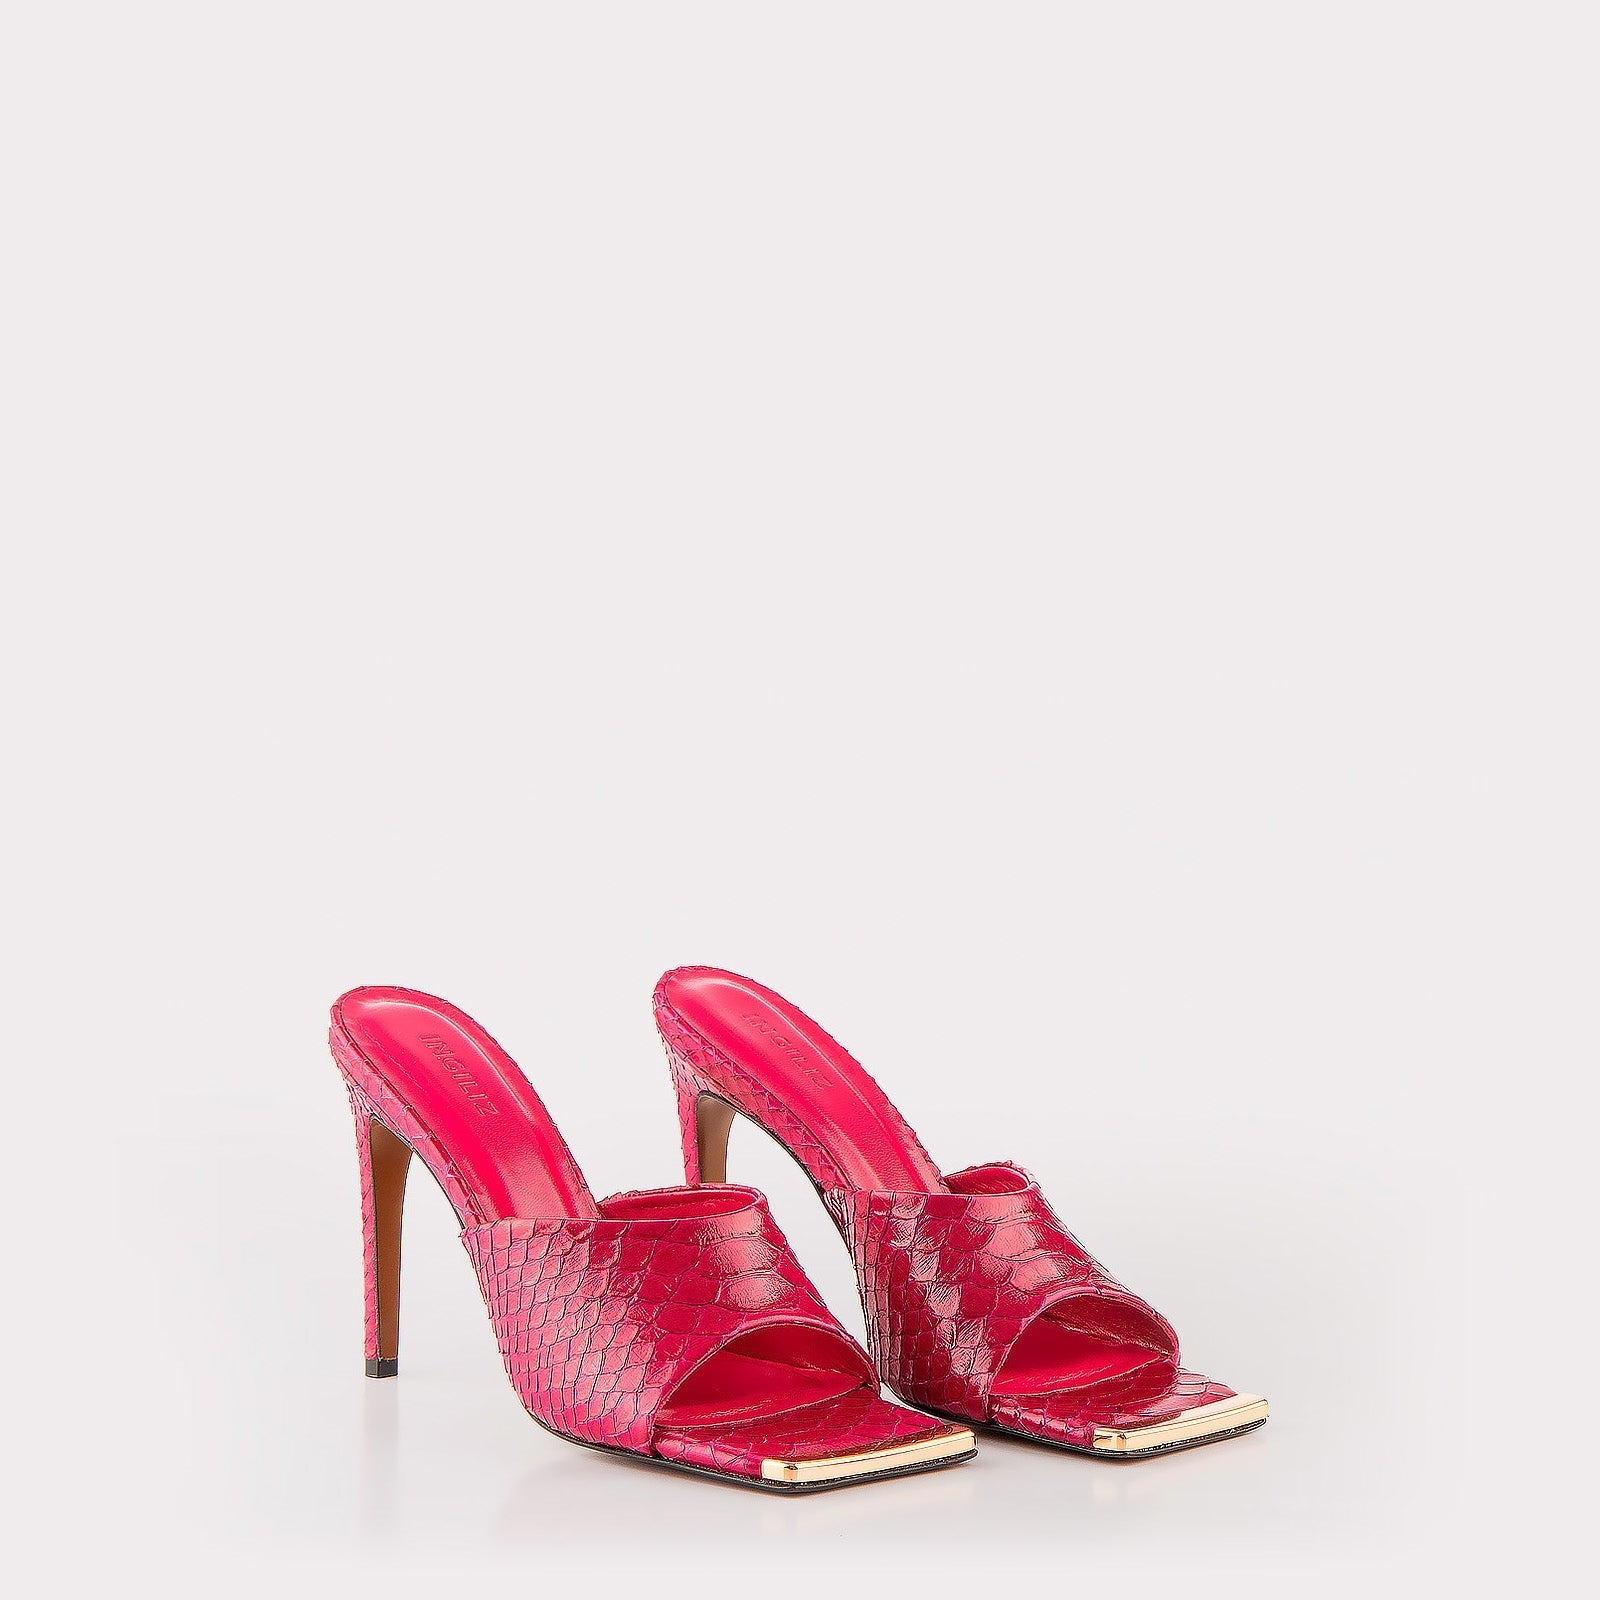 TEXTURED LEATHER MULES KALINA FUXIA